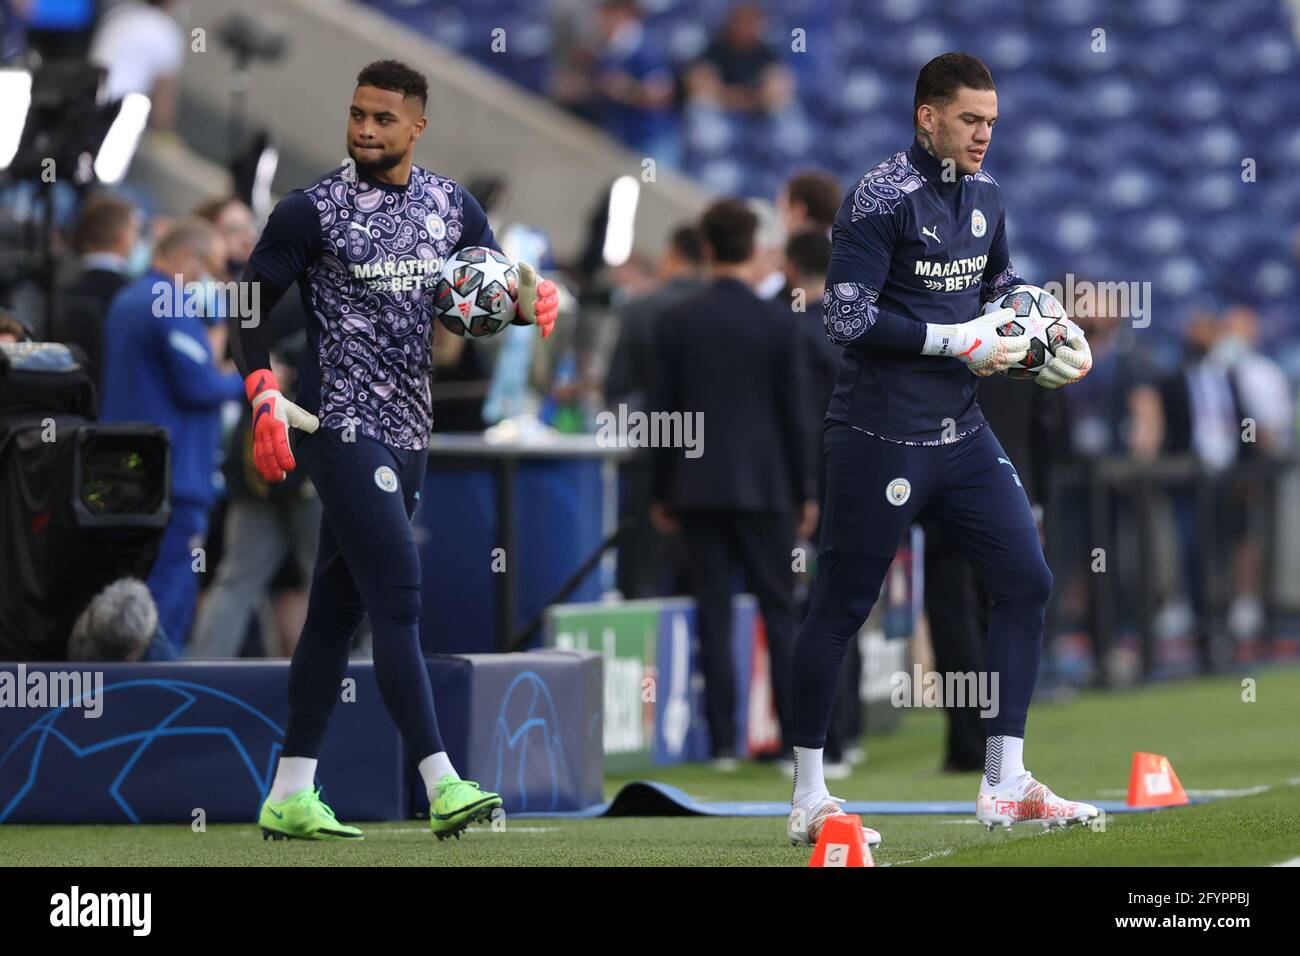 PORTO, PORTUGAL - MAY 29: Zack Steffen [left] and Ederson [right] of Manchester City before the UEFA Champions League Final between Manchester City and Chelsea FC at Estadio do Dragao on May 29, 2021 in Porto, Portugal. (Photo by MB Media) Stock Photo